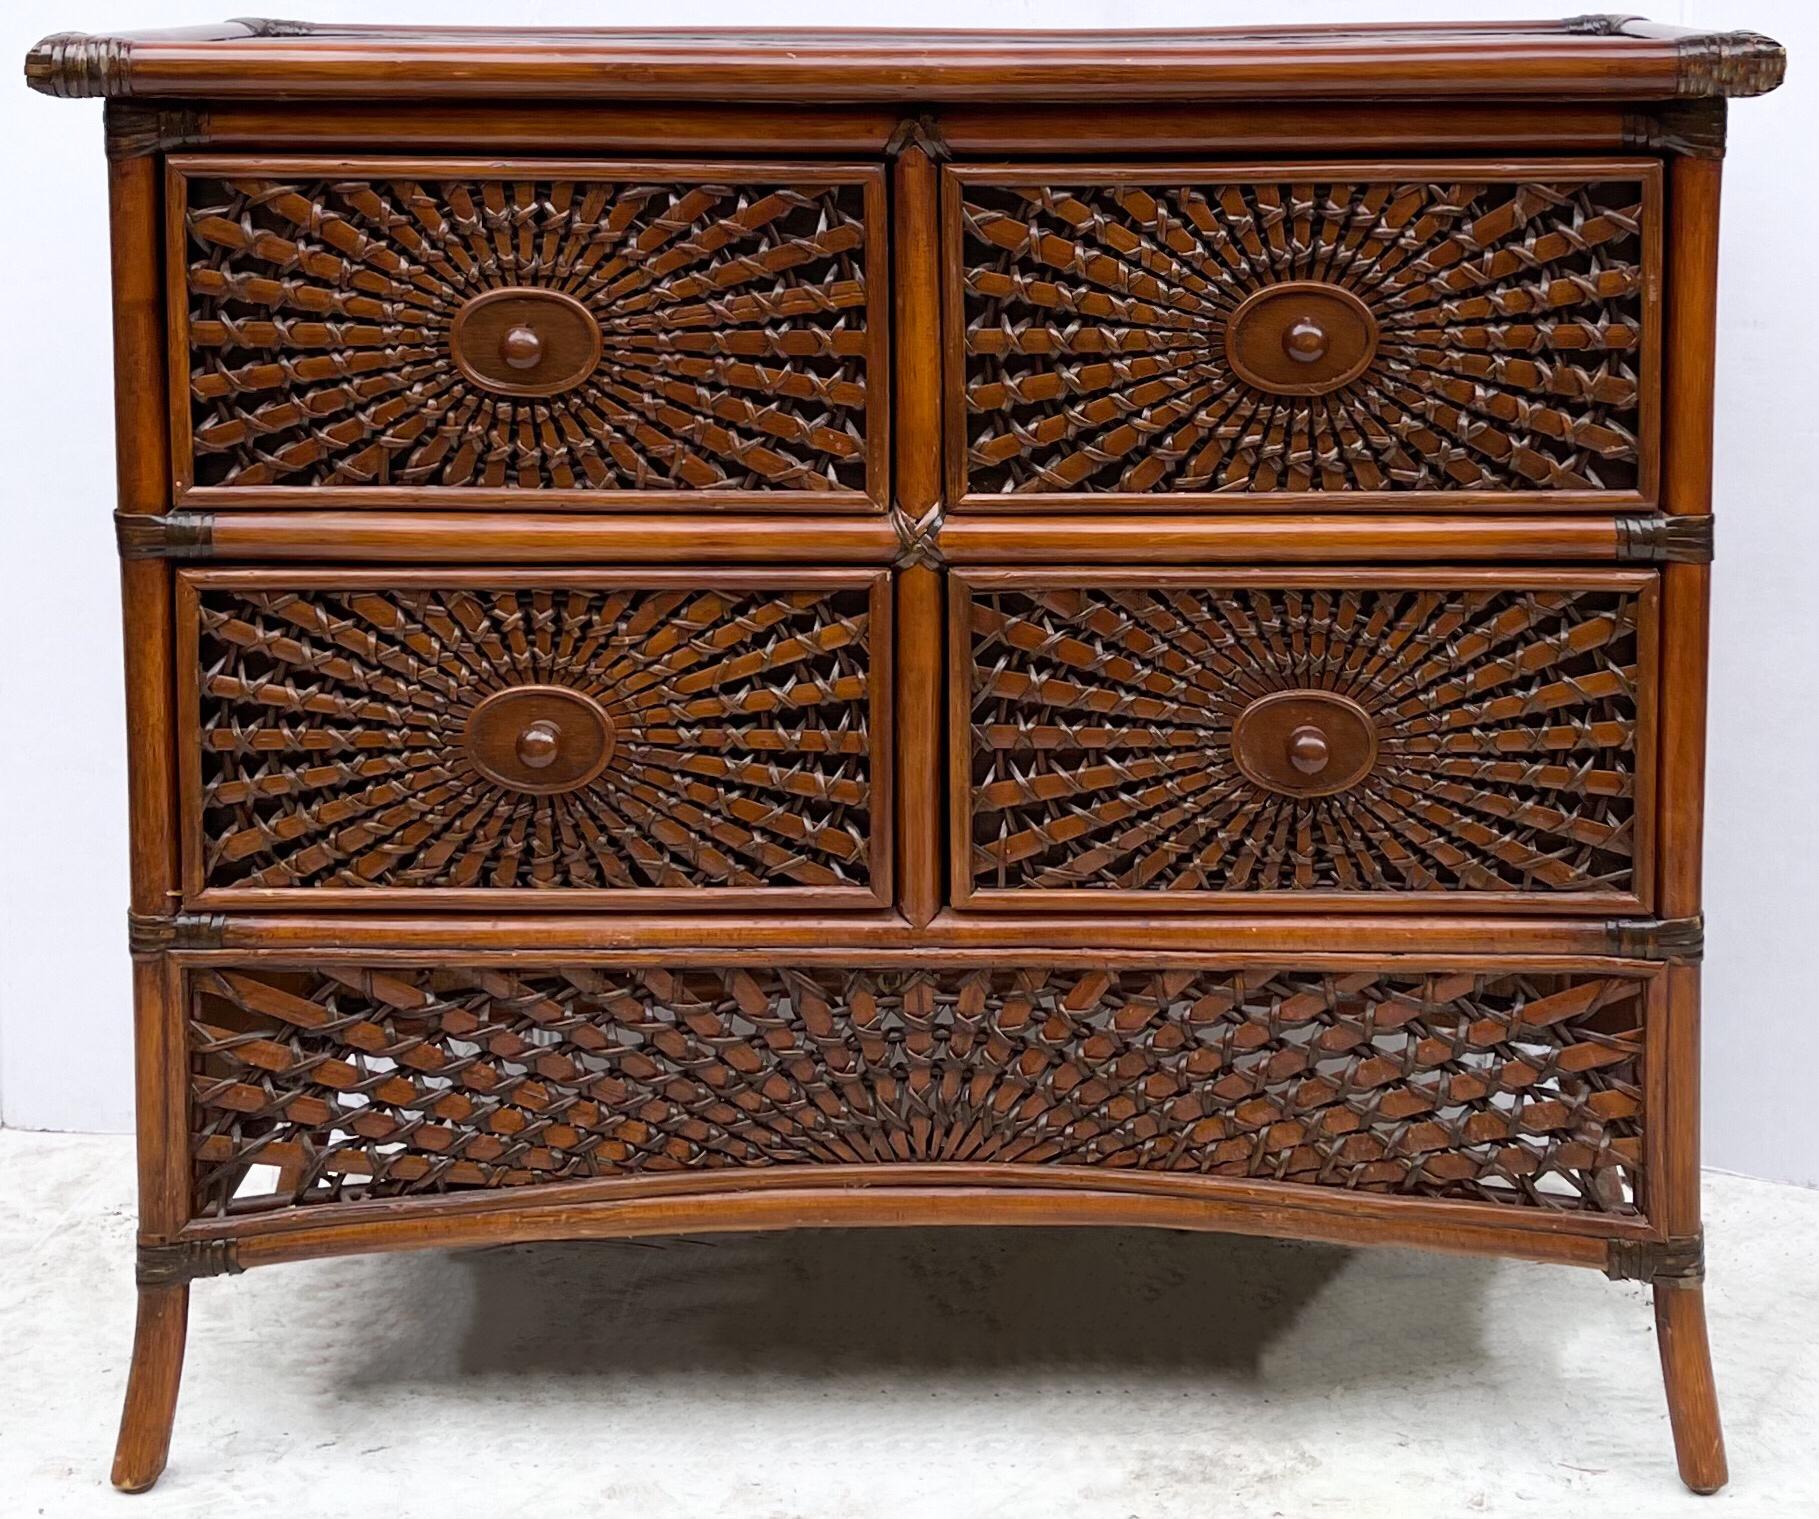 This is great looking, it is a woven rattan or bamboo chest of drawers. This type of weaving is very labor intensive and indicative of skilled craftsmanship. I would say it dates to the 50s or 60s. It is in very good condition.